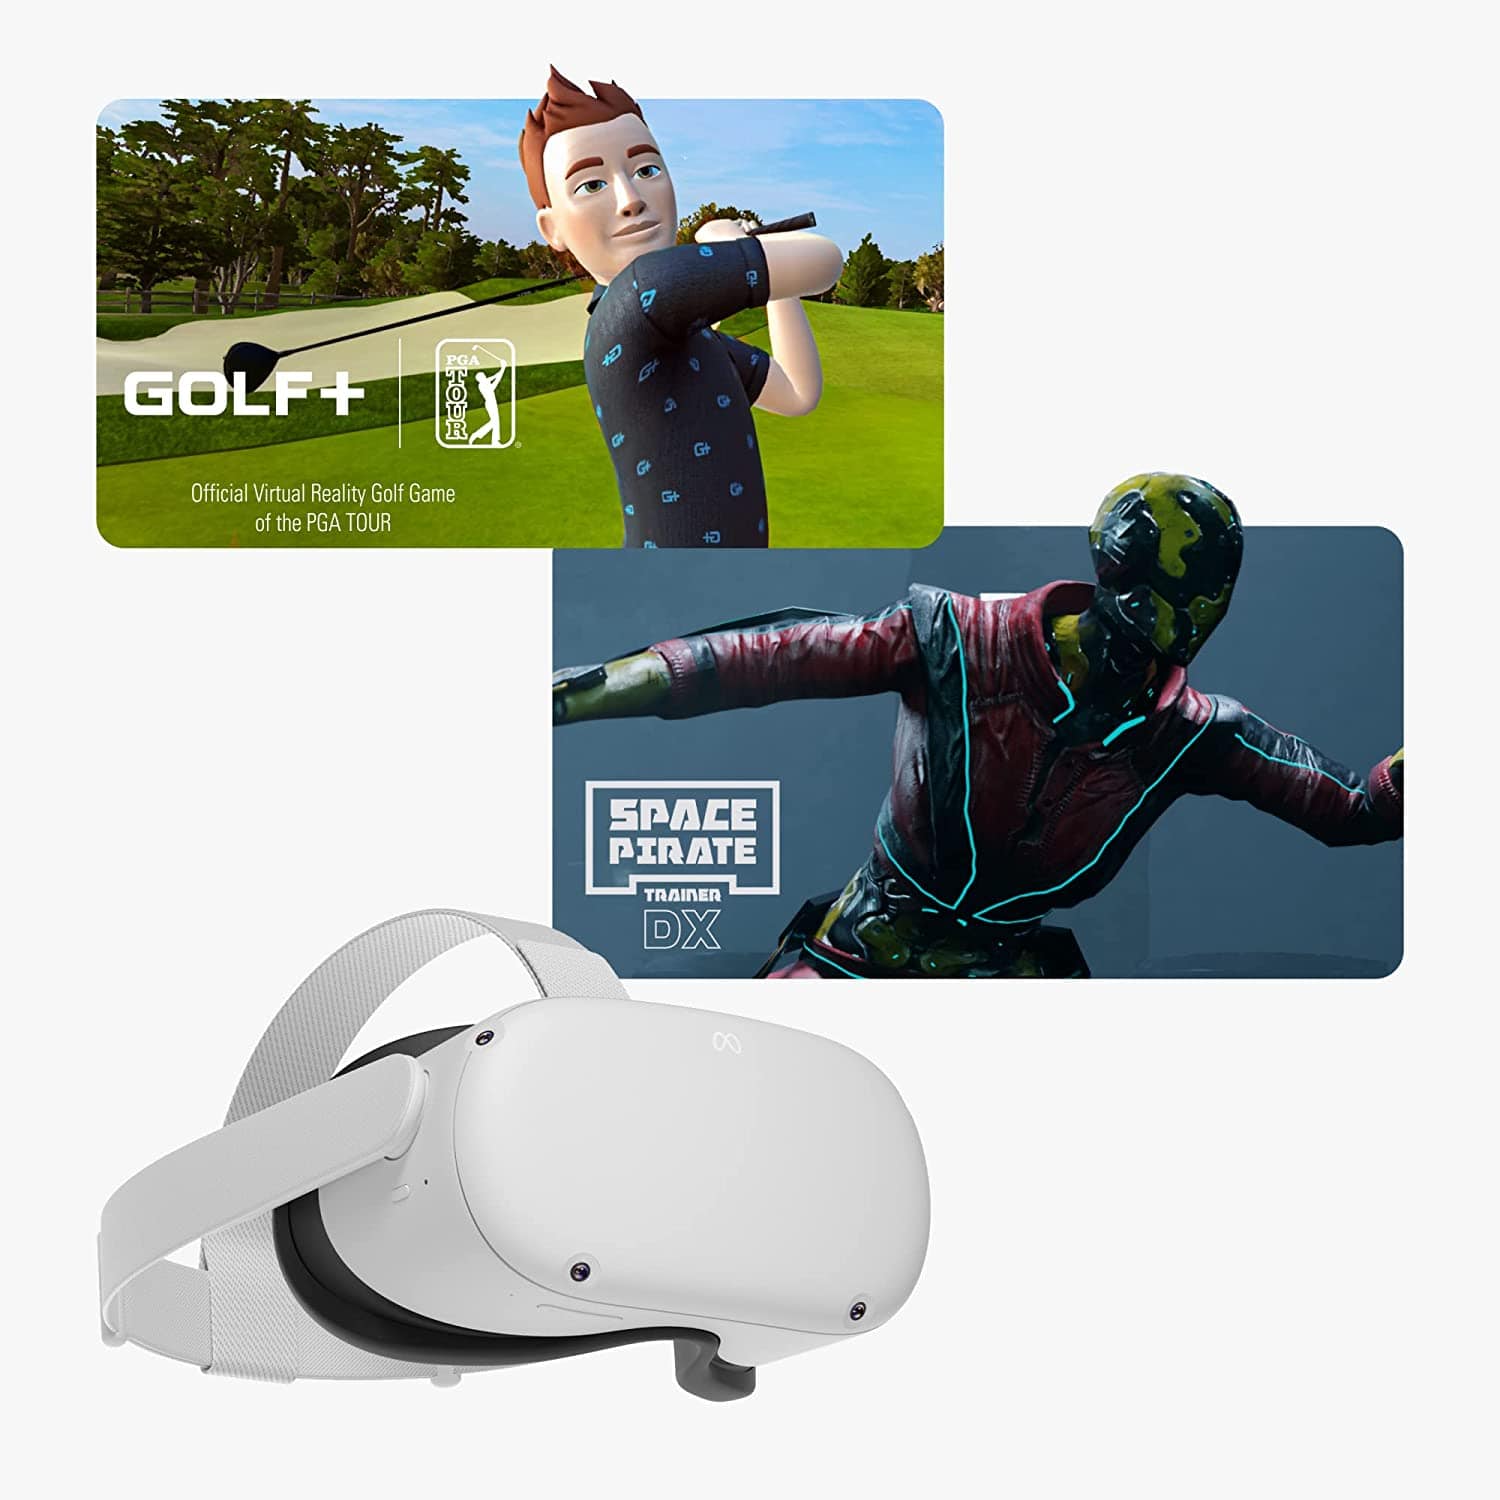 Meta Quest 2 All-In-One VR Headset with 256GB - Includes GOLF and Space Pirate Trainer DX